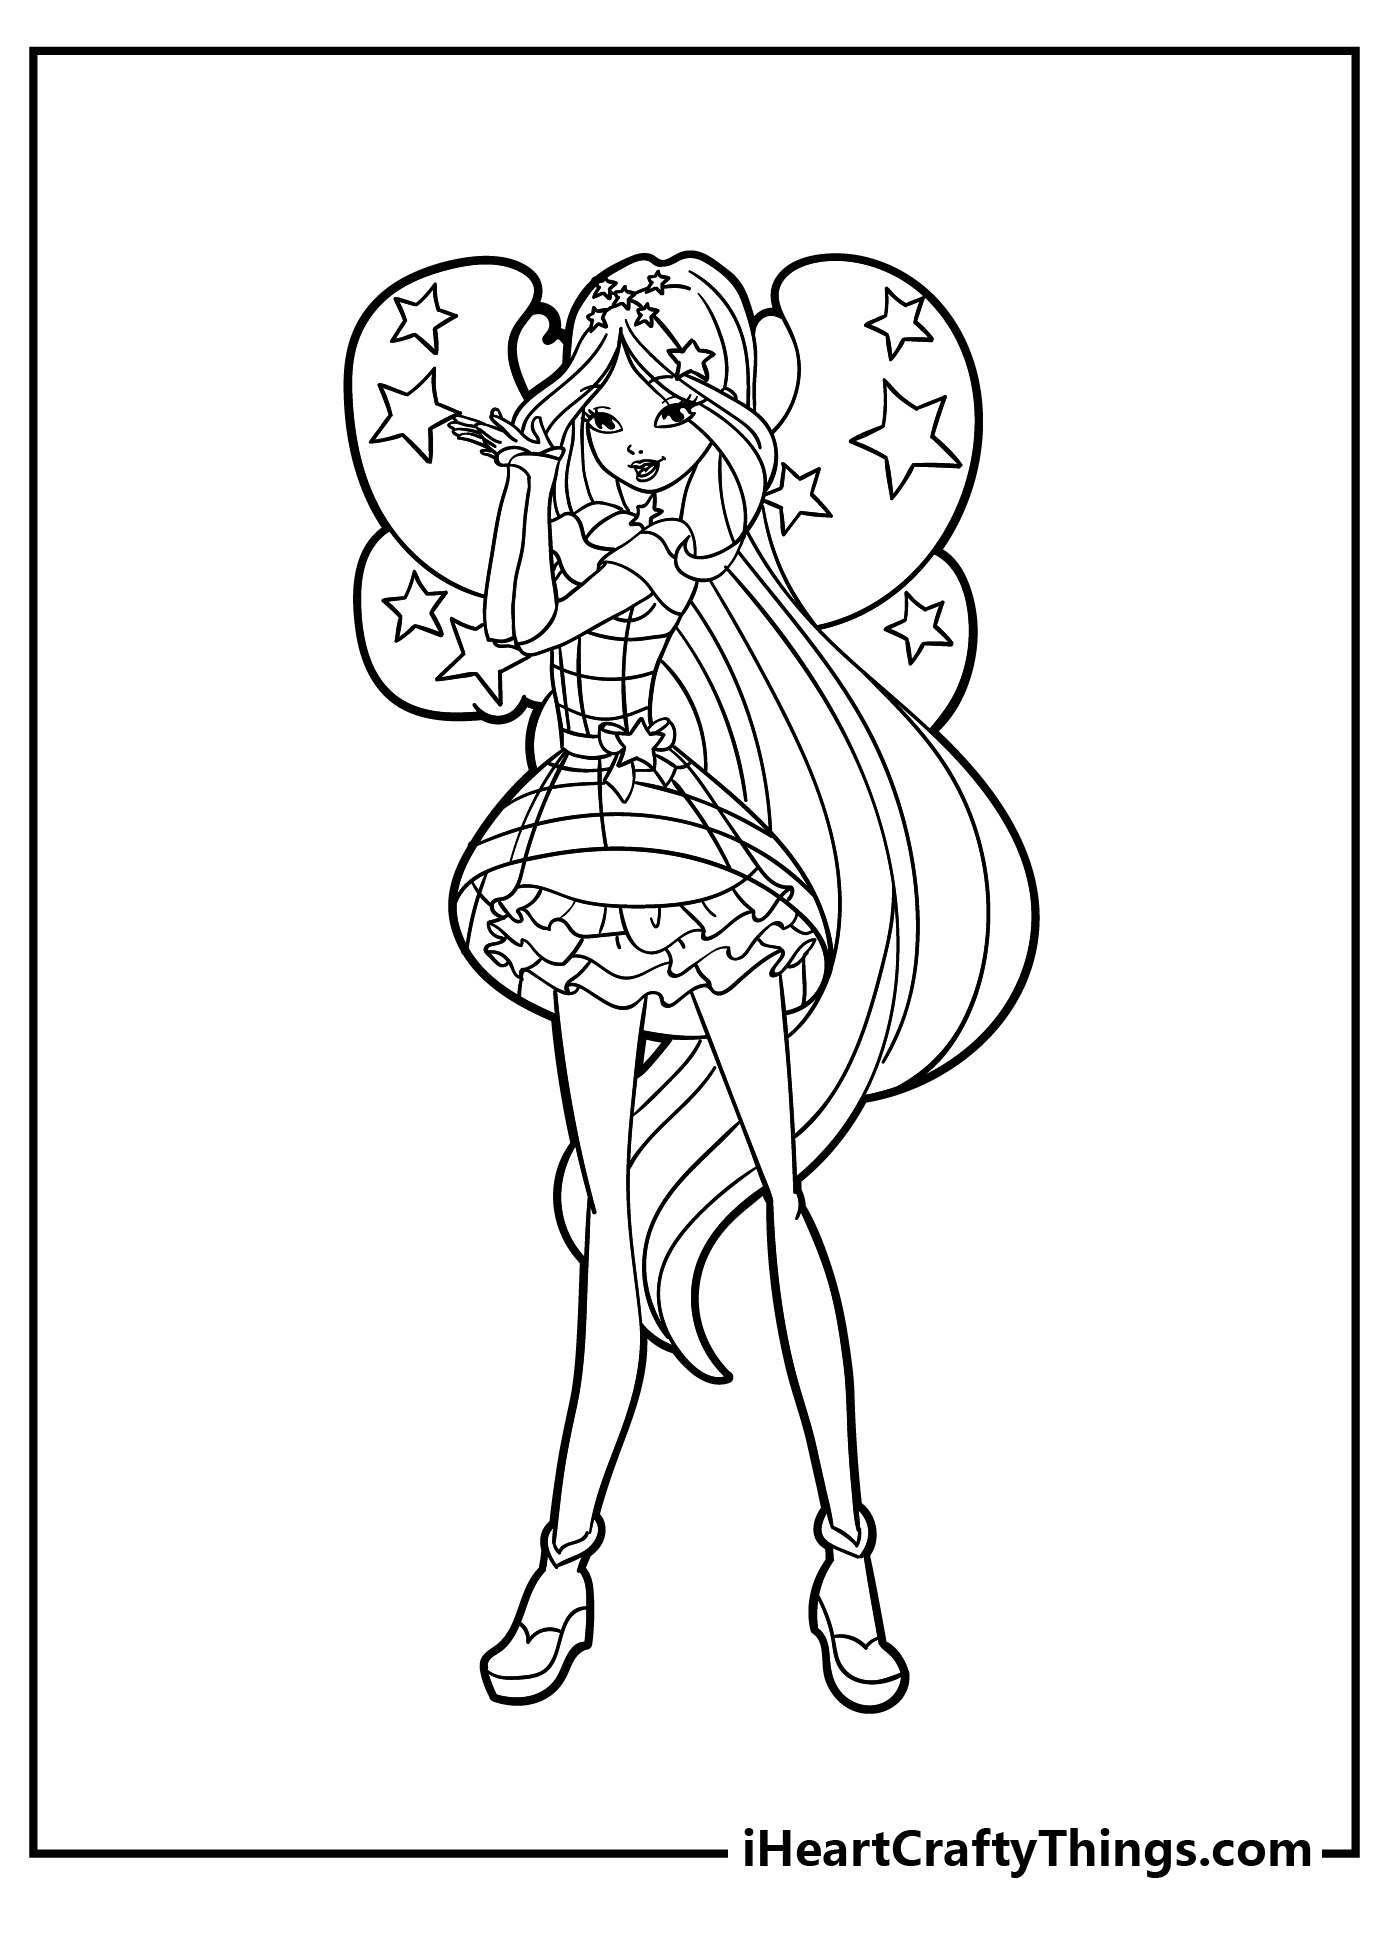 Winx Coloring Pages for kids free download